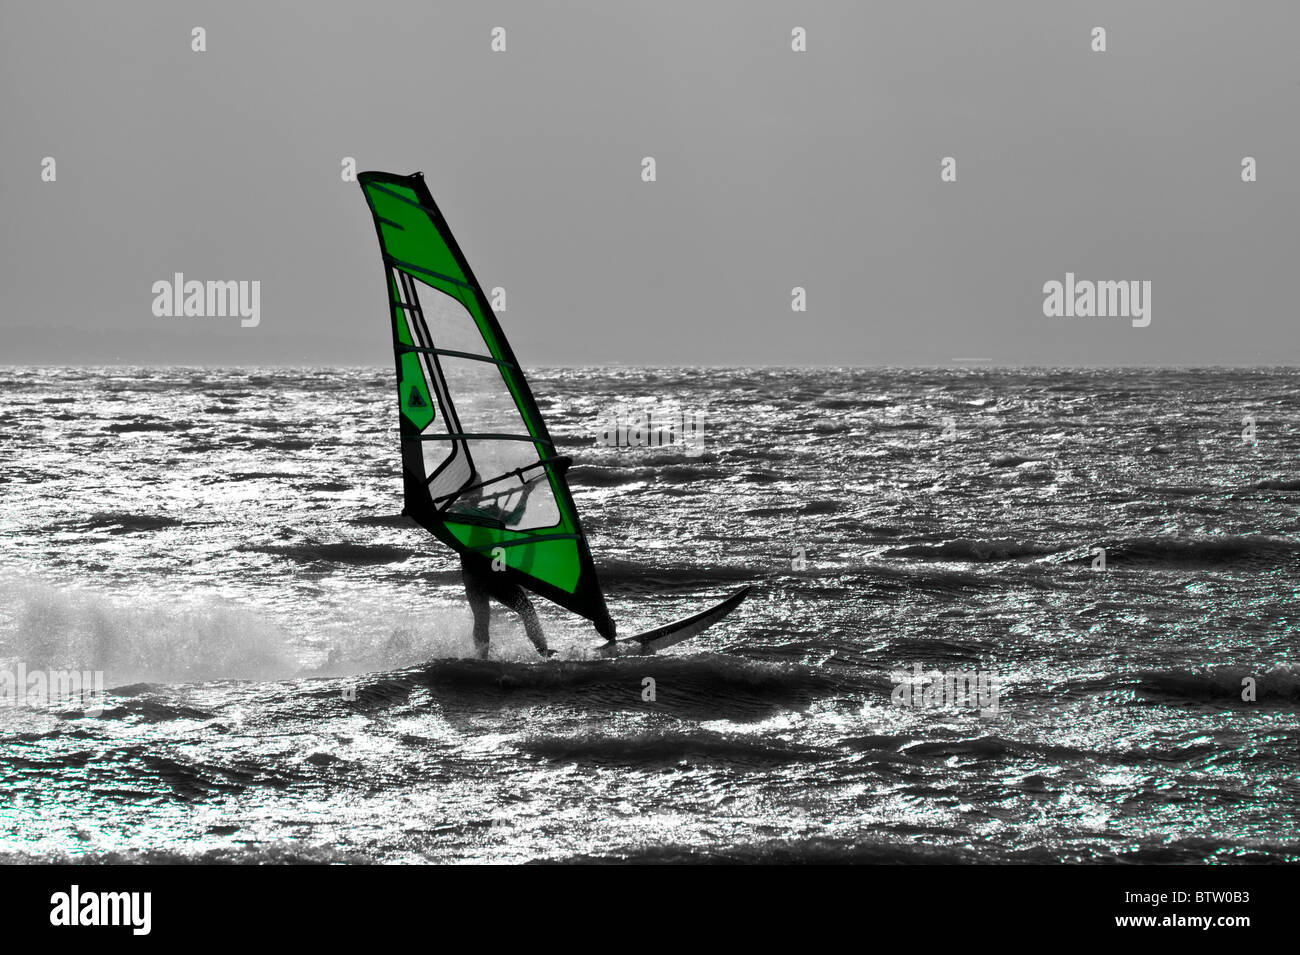 Lone windsurfer silhouetted against grey sky with color of sail enhanced. Stock Photo